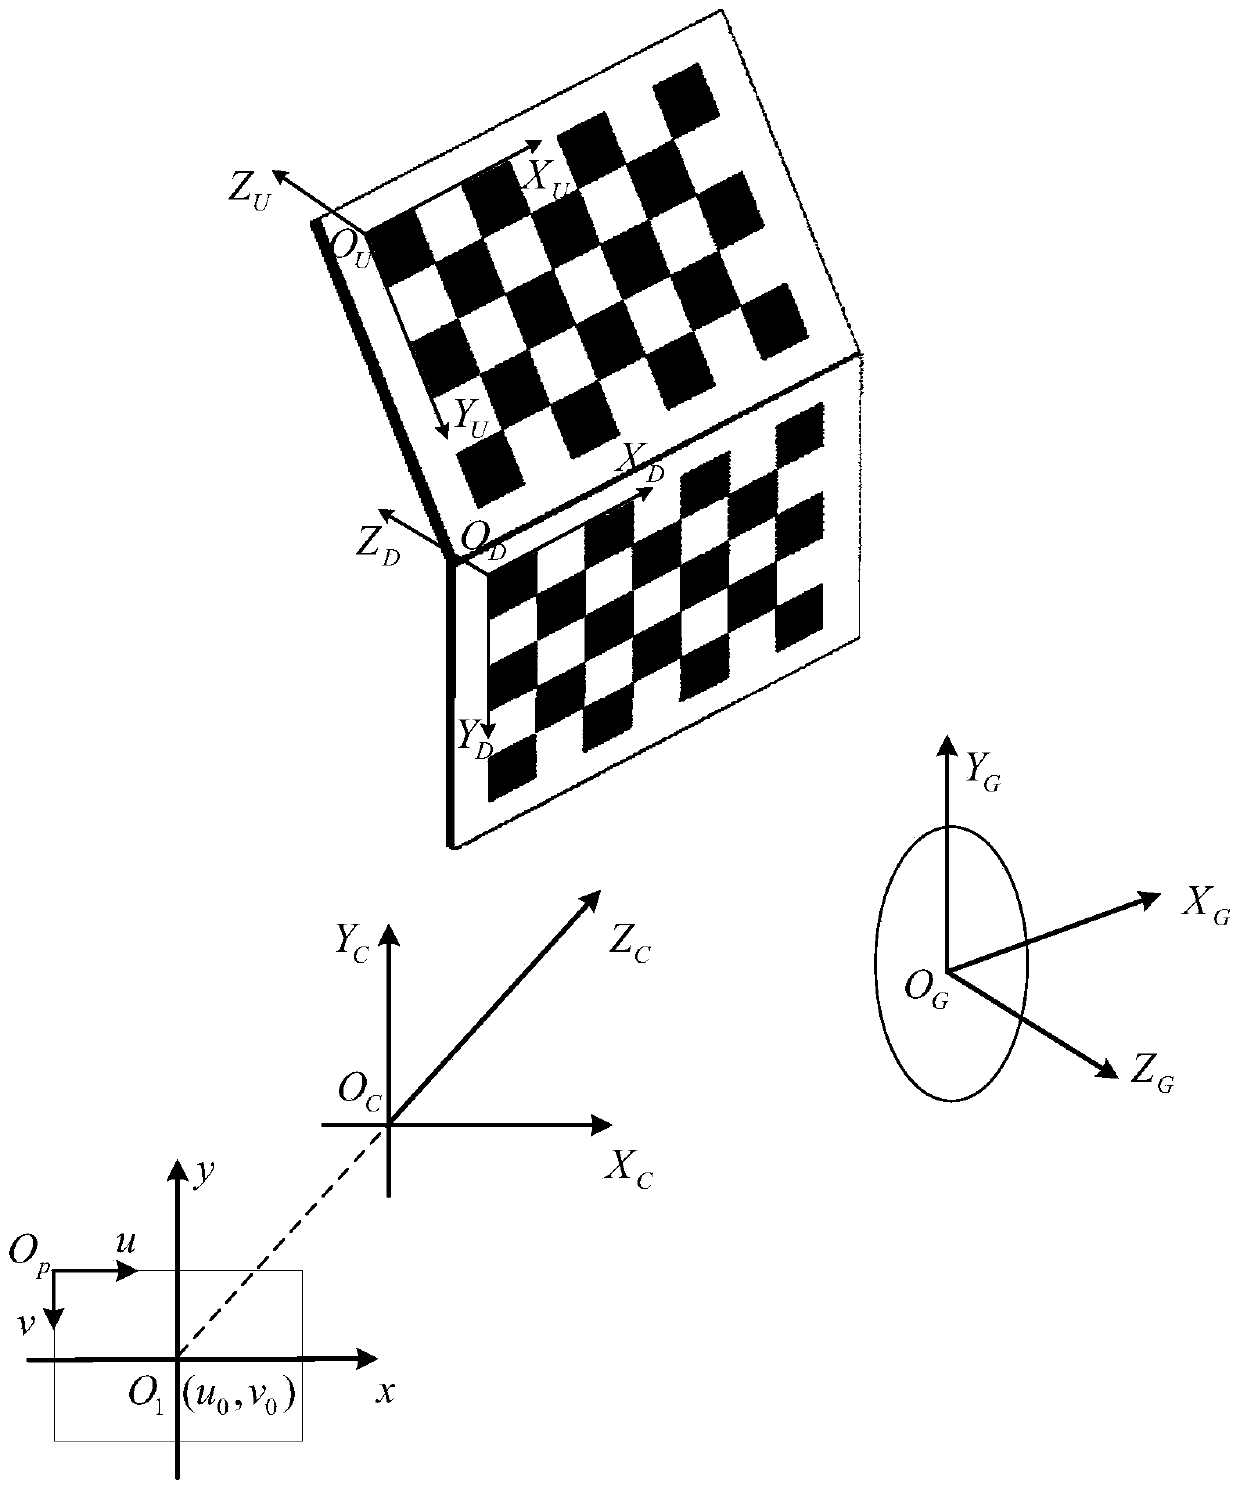 Galvanometer scanning system calibration method based on double checkerboards